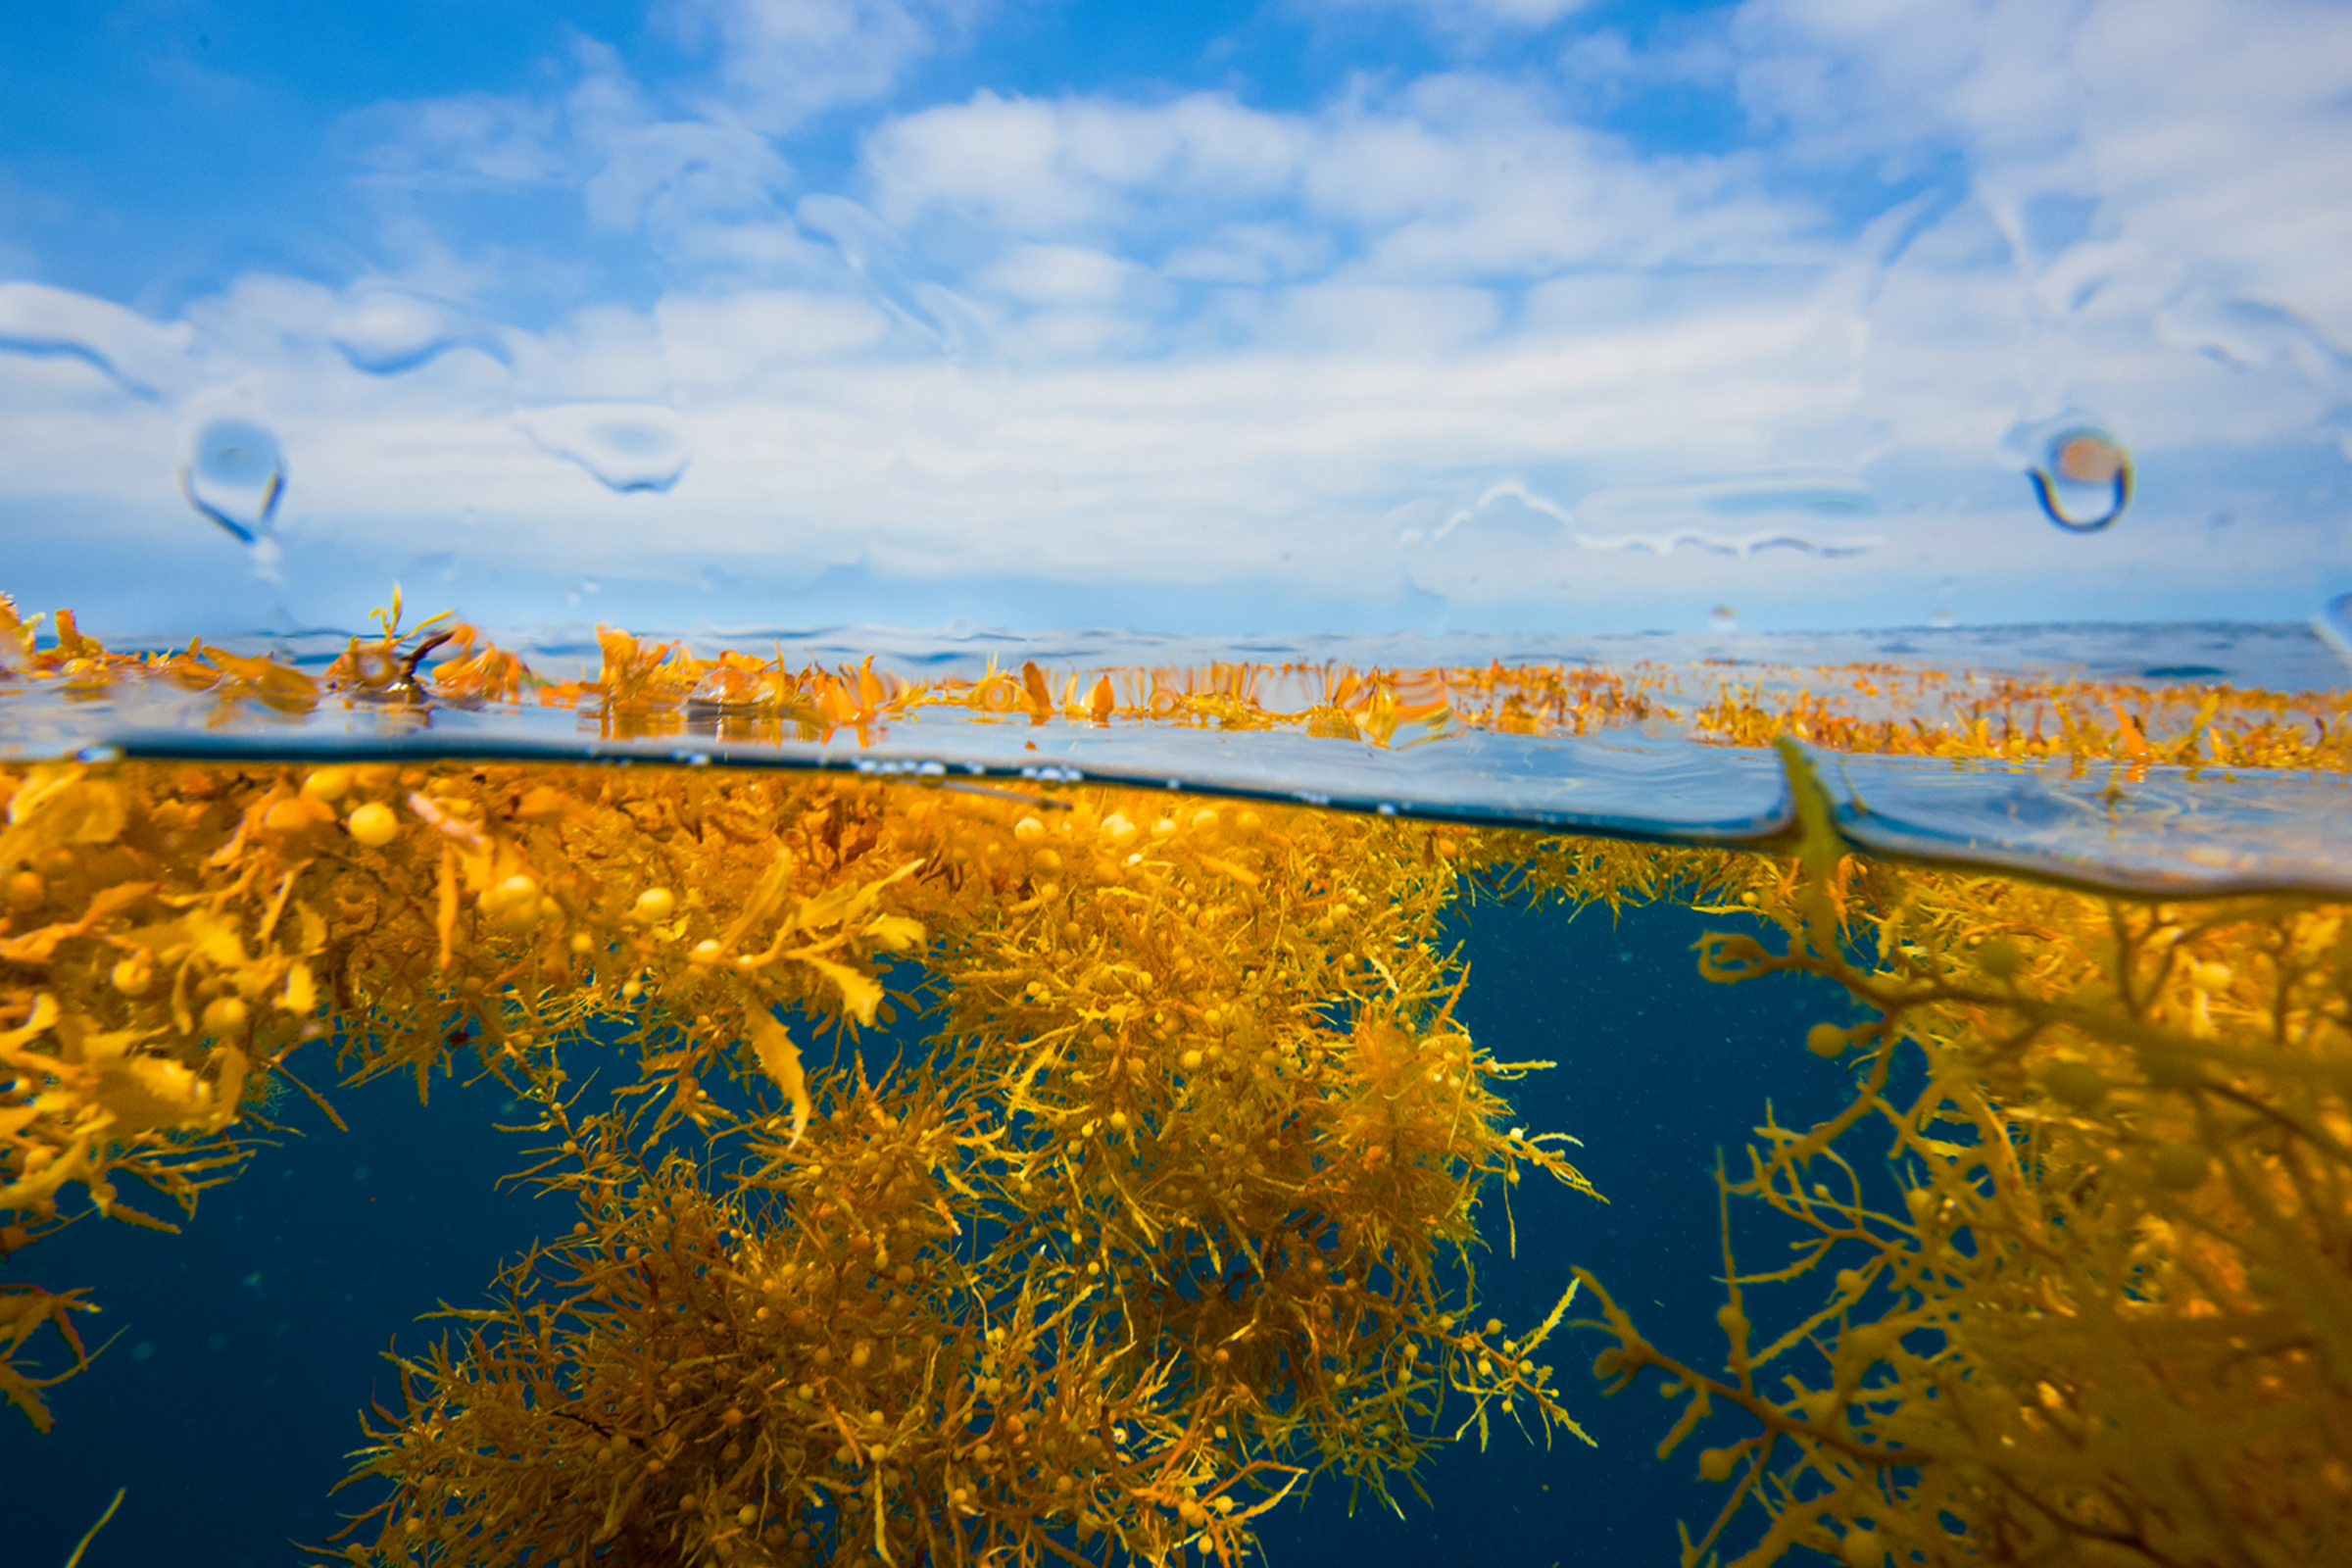 View of seaweed in the ocean, both above and below water. A blue sky with large, wide clouds is seen on the horizon.